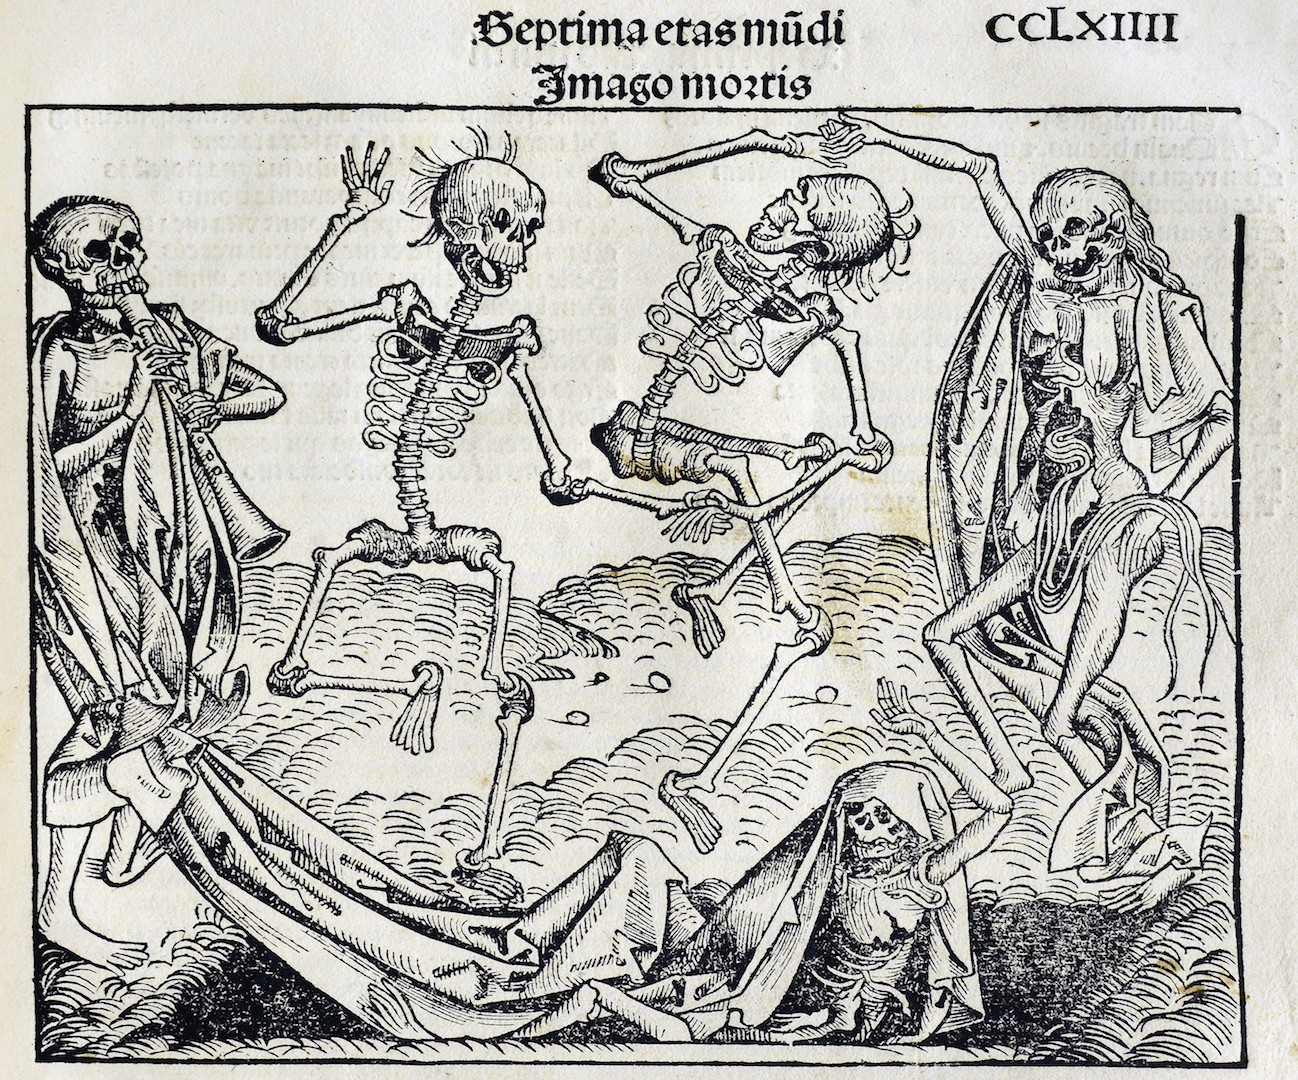 an essay about the black death